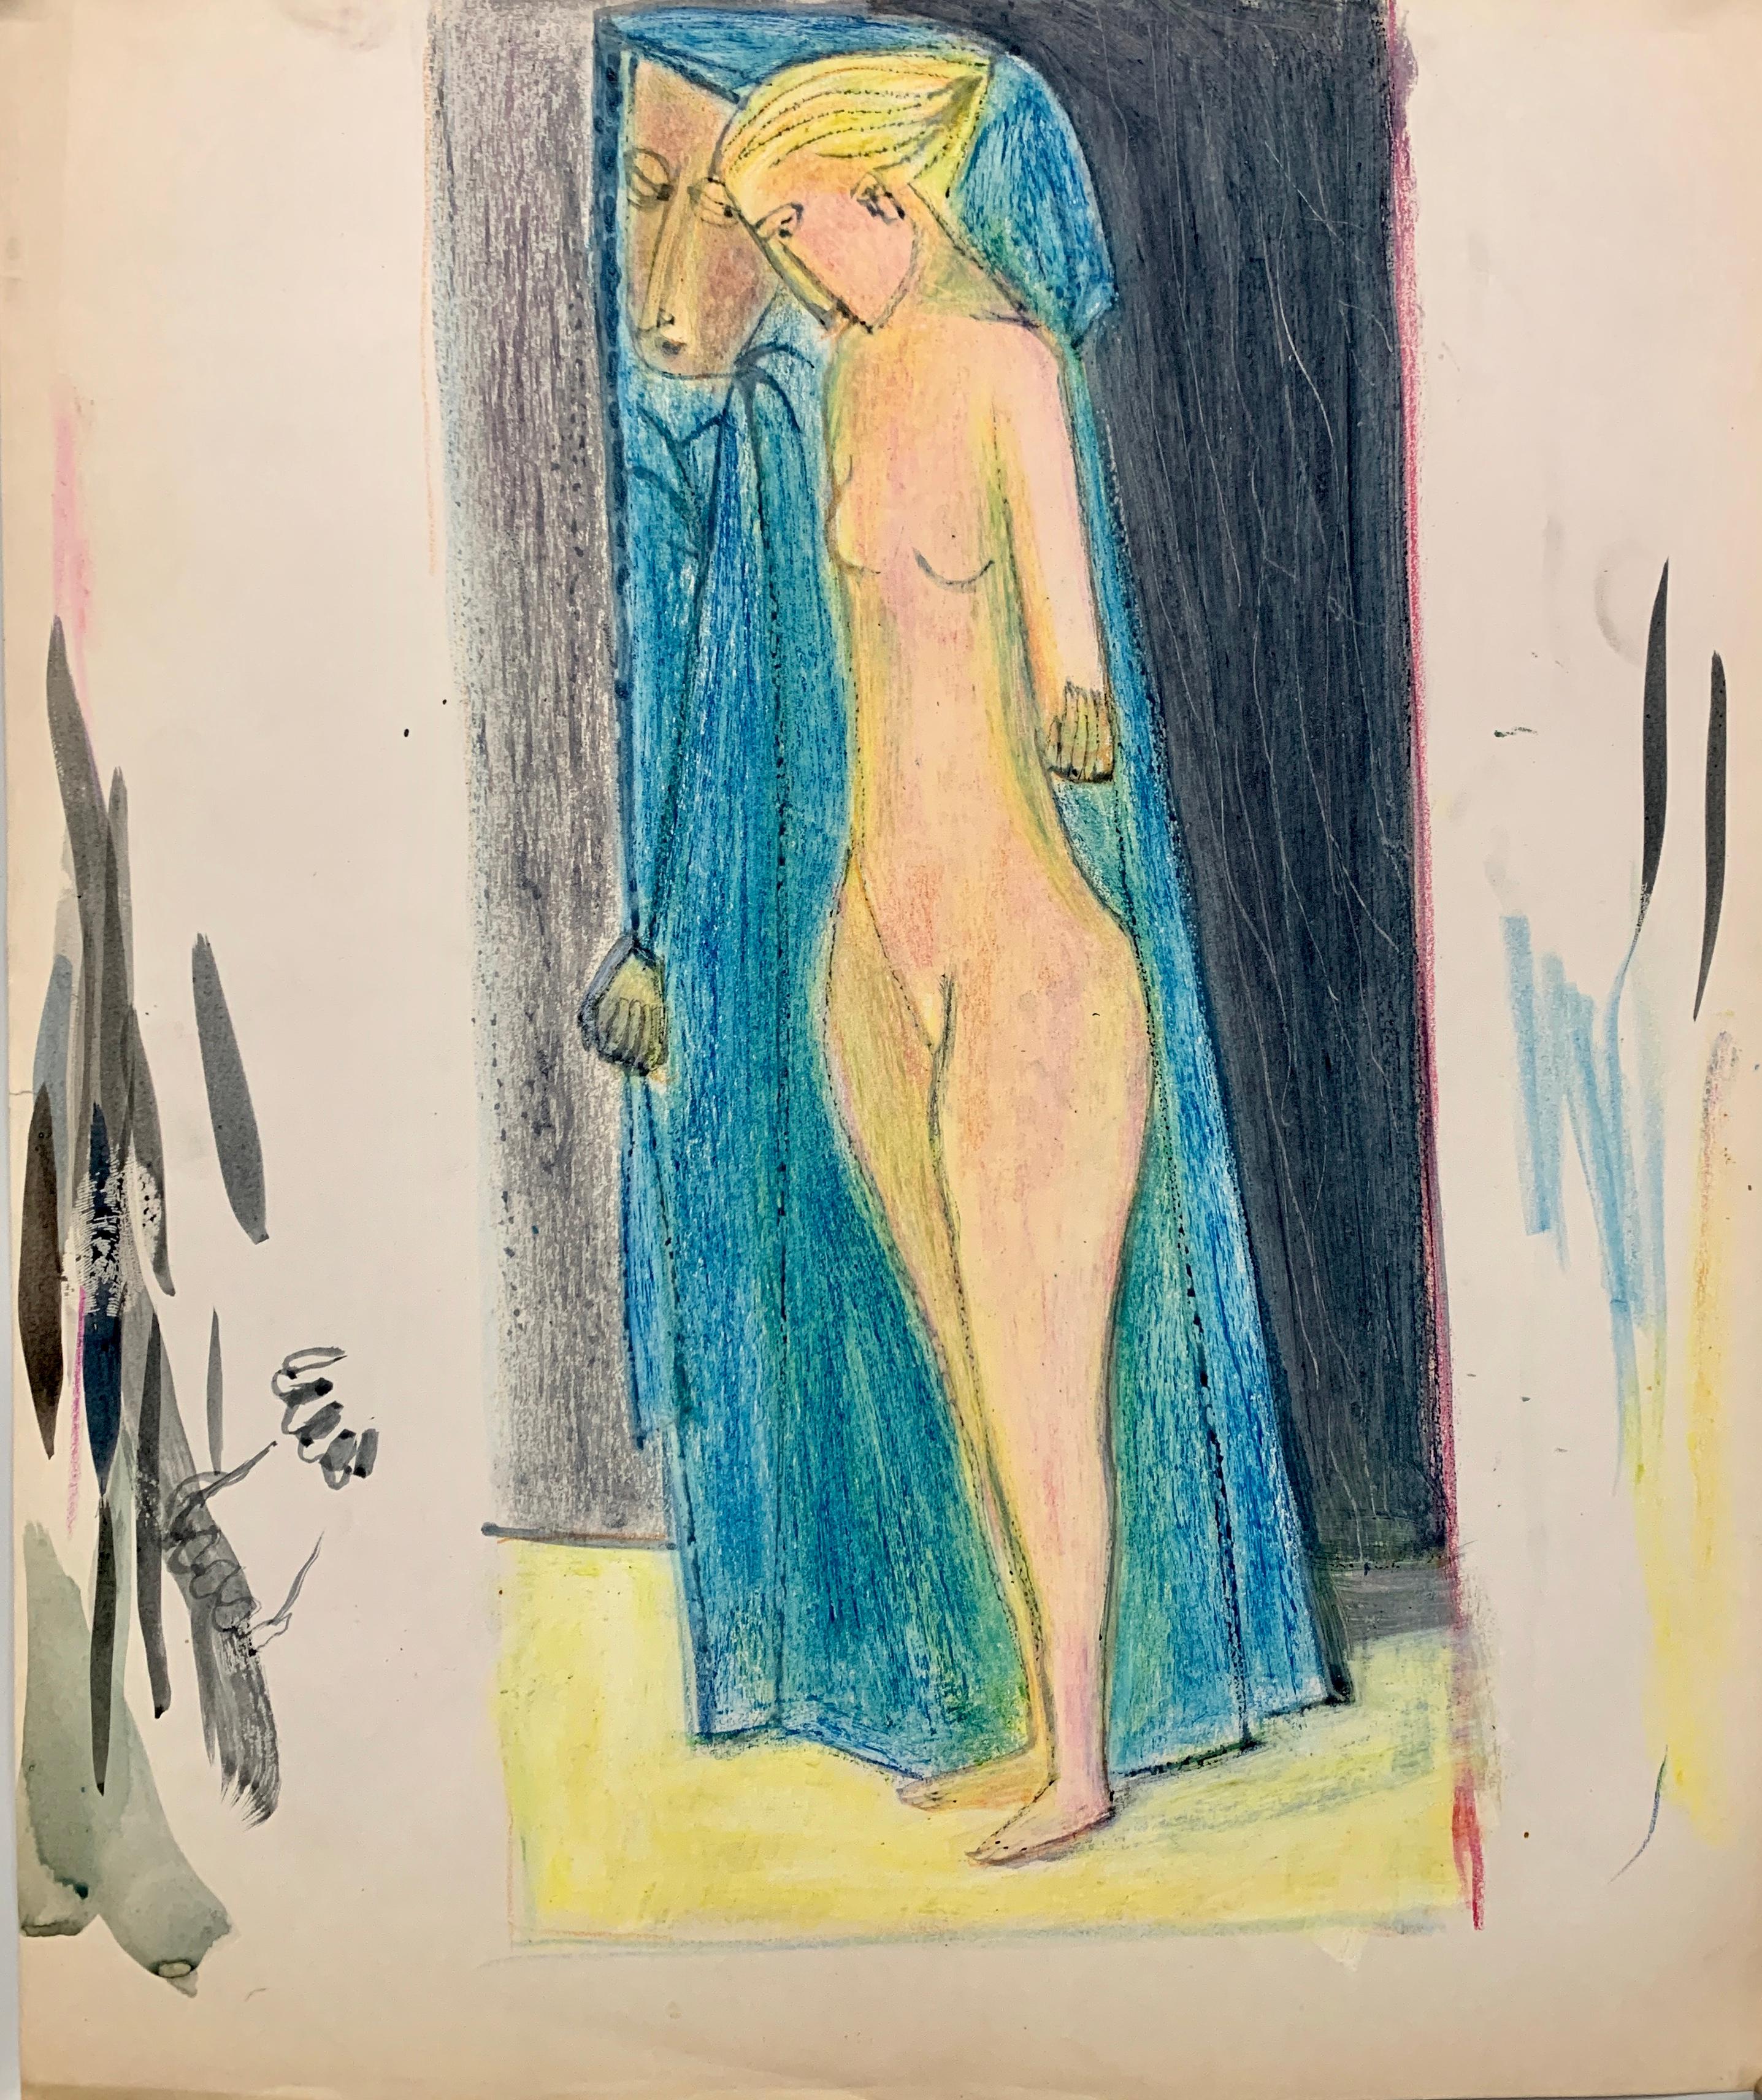 Donald Stacy Nude - 1950s "Mirror In the Bathroom" Pastel and Gouache Drawing Museum of Modern Art 